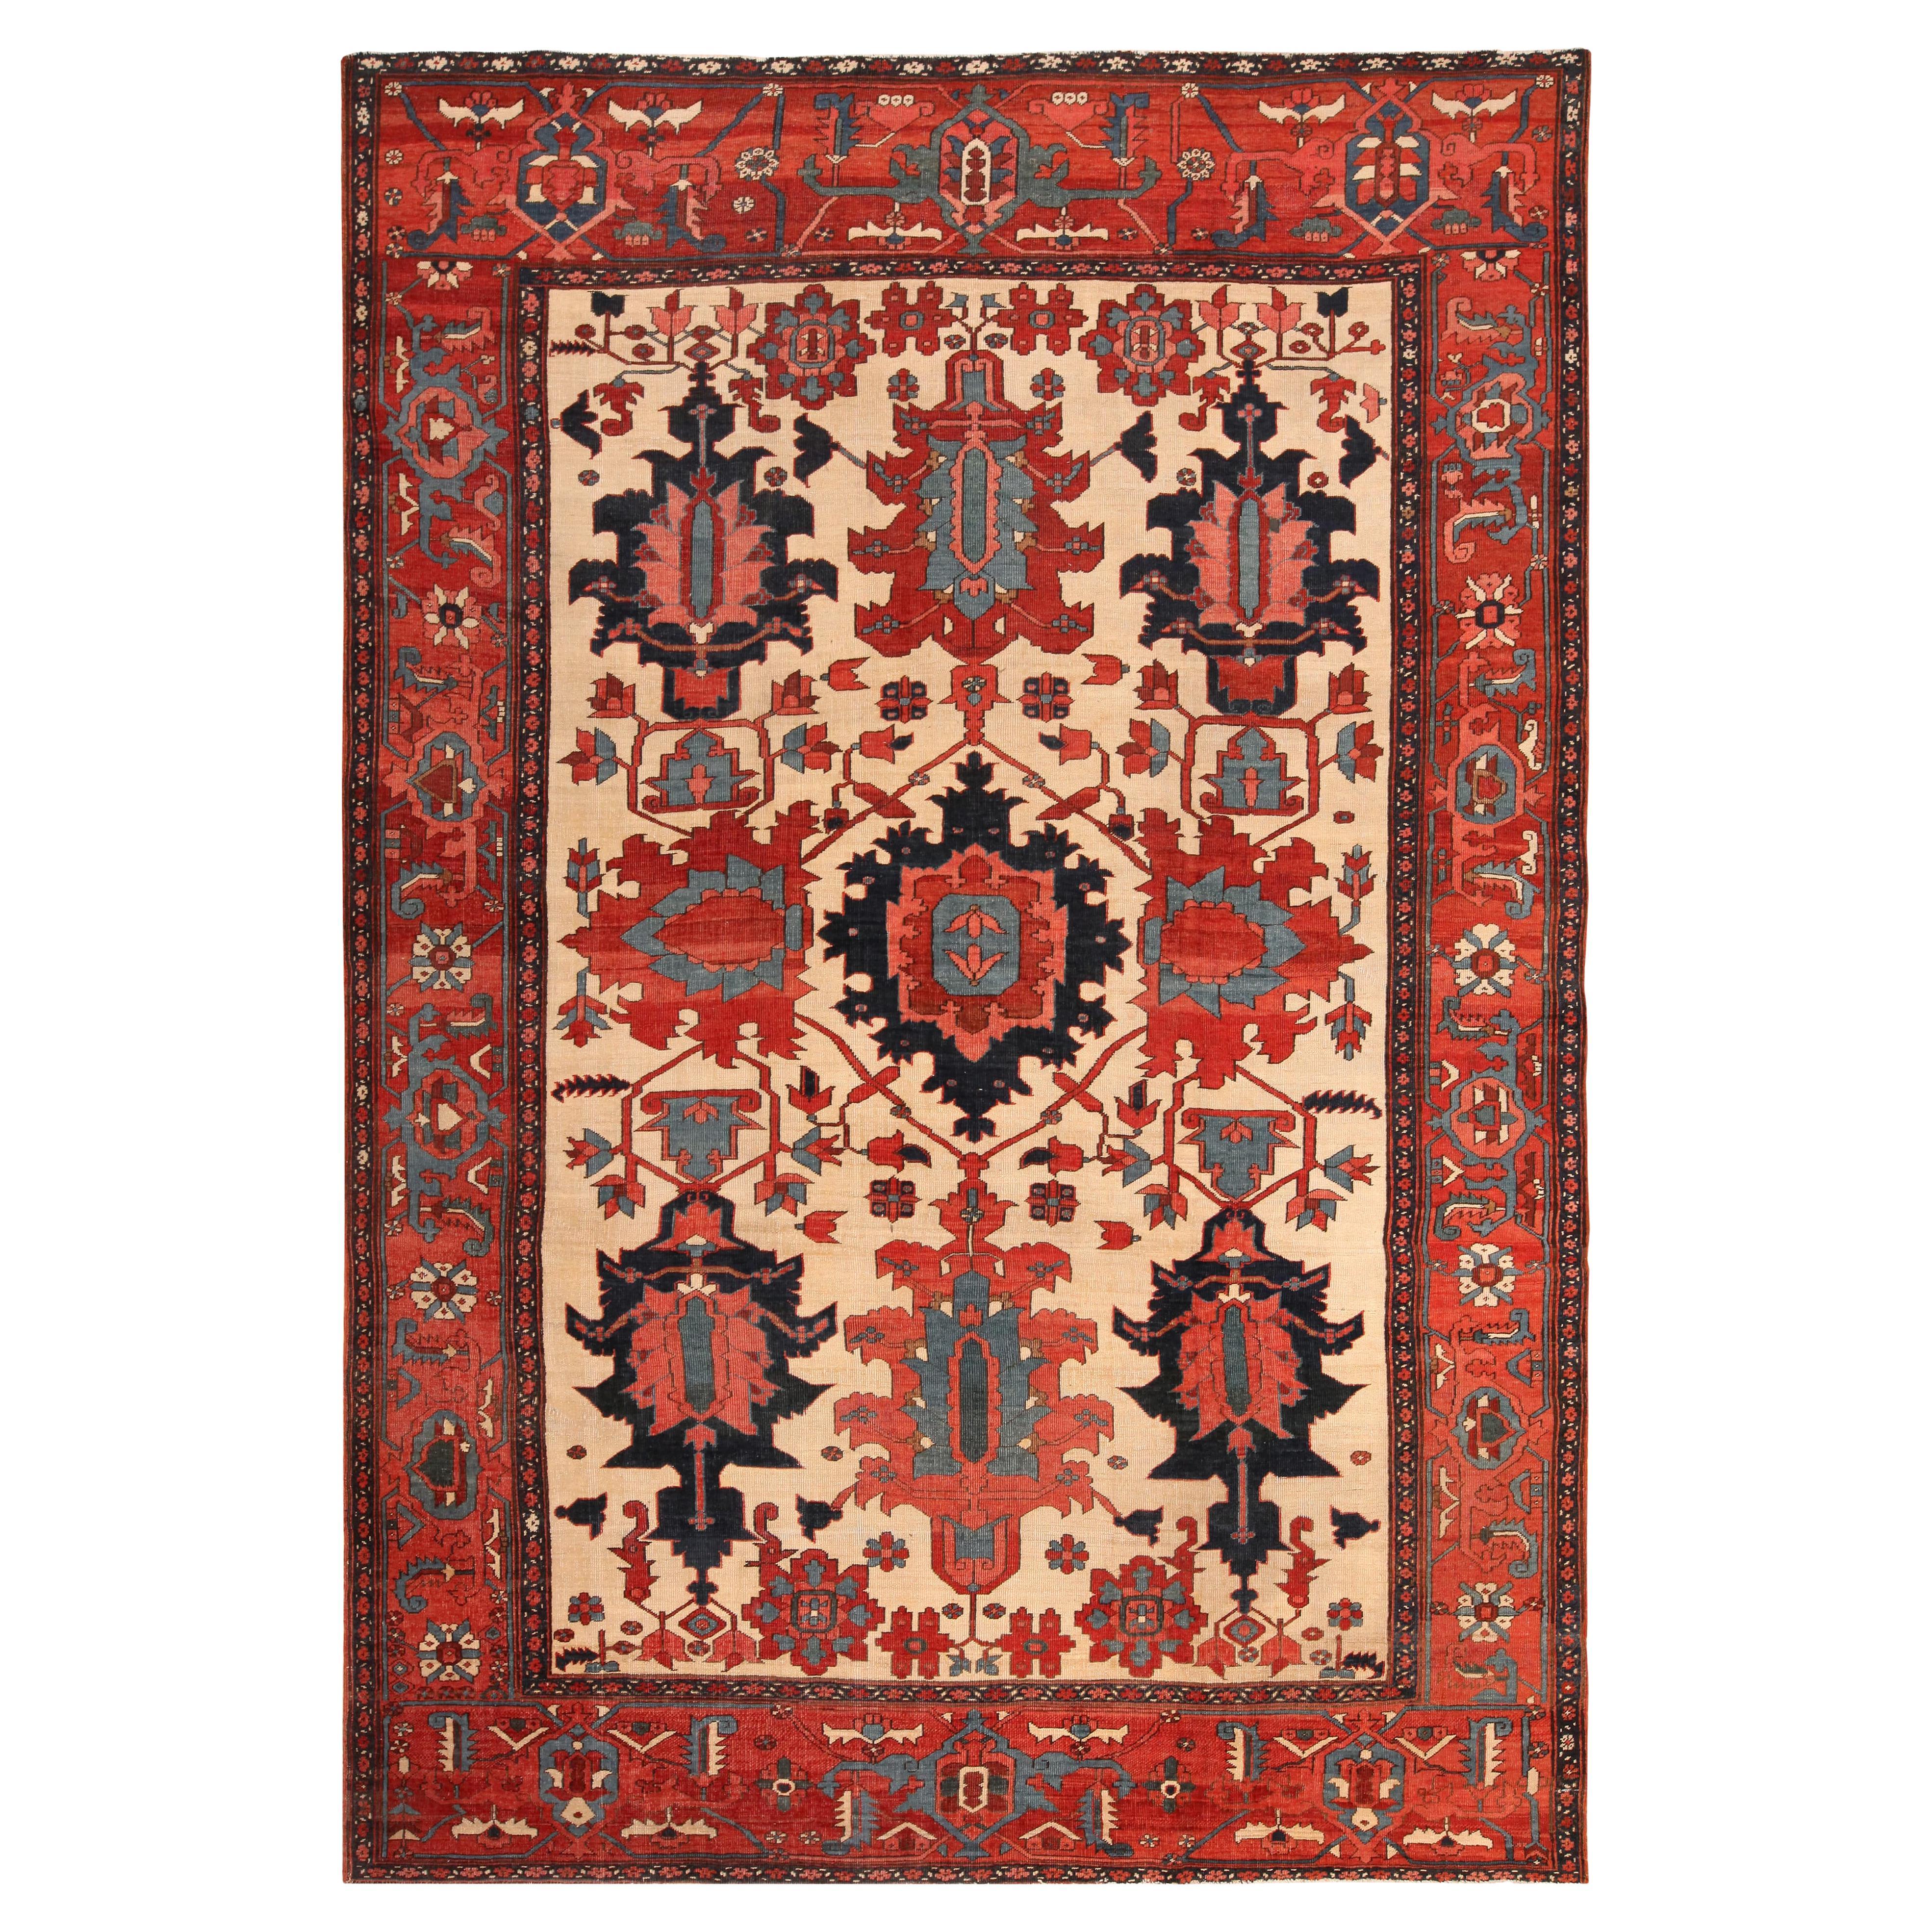 Nazmiyal Collection Antique Persian Heriz Area Rug. Size: 9 ft 2 in x 13 ft 4 in